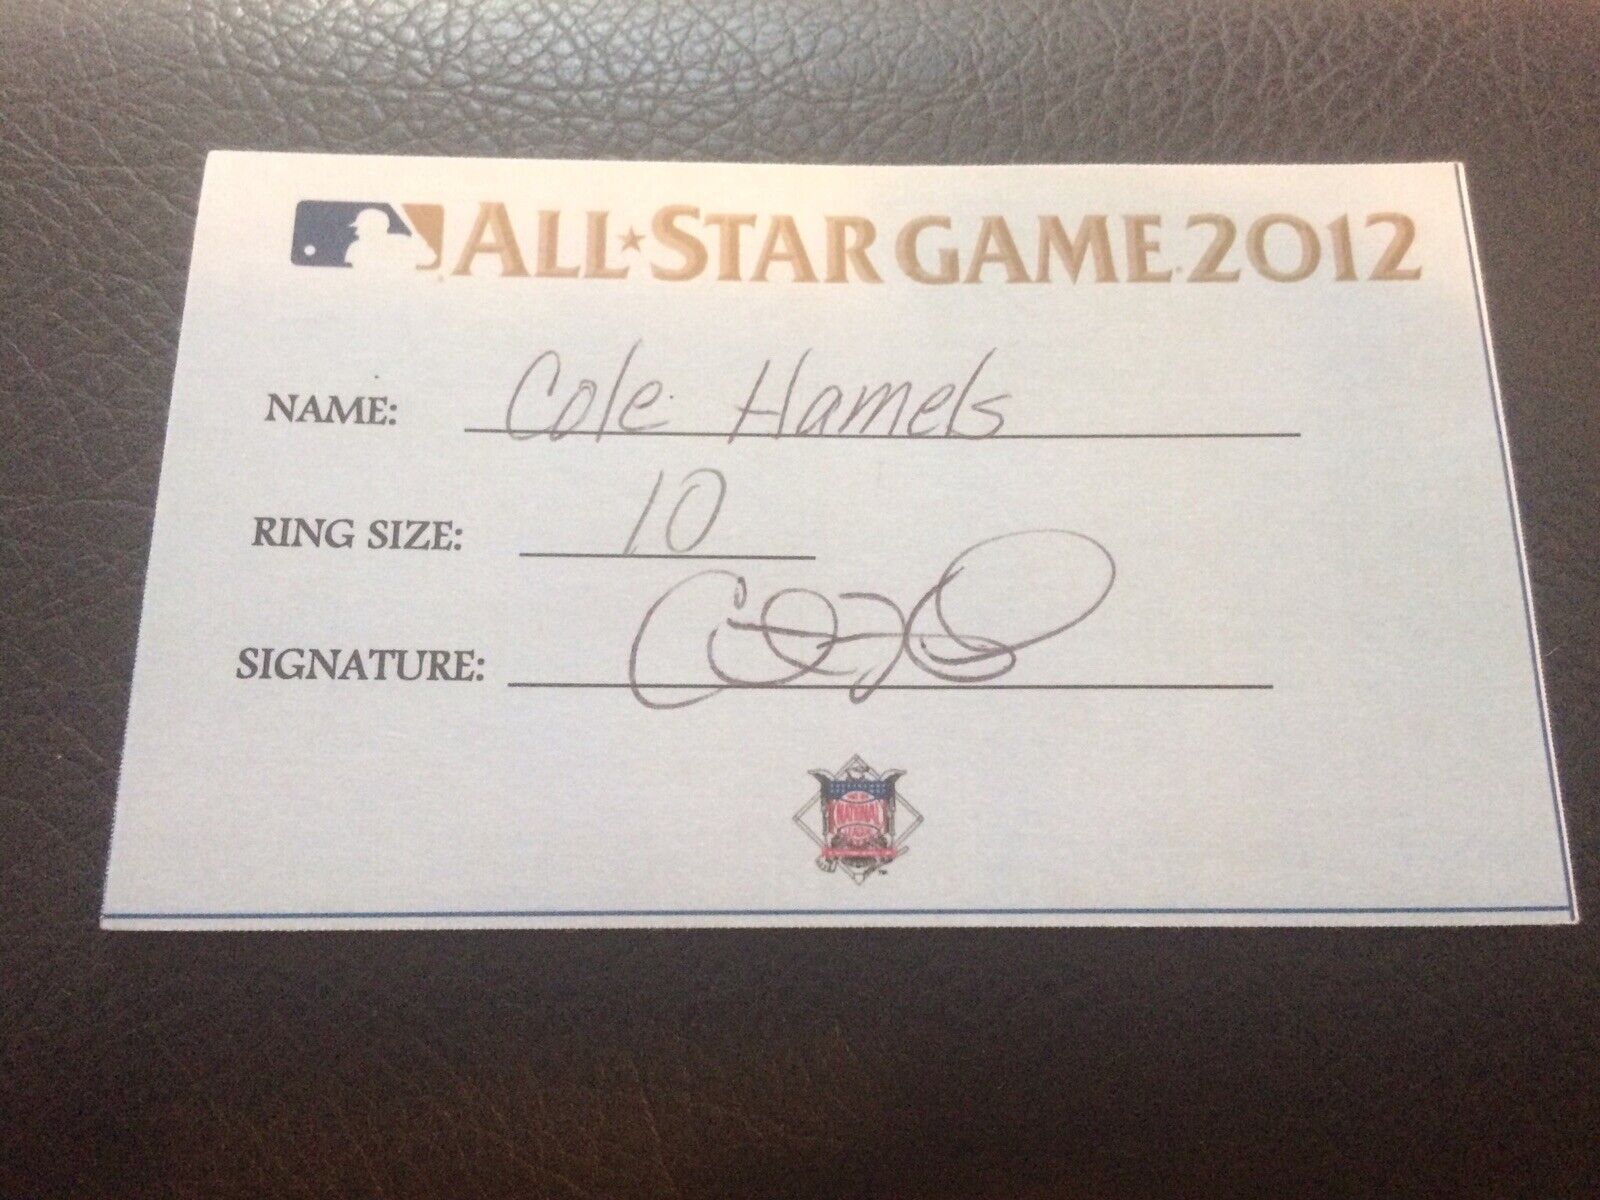 2012 Cole Hamels Signed All Star Ring Receipt Auto MLB Philadelphia Phillies